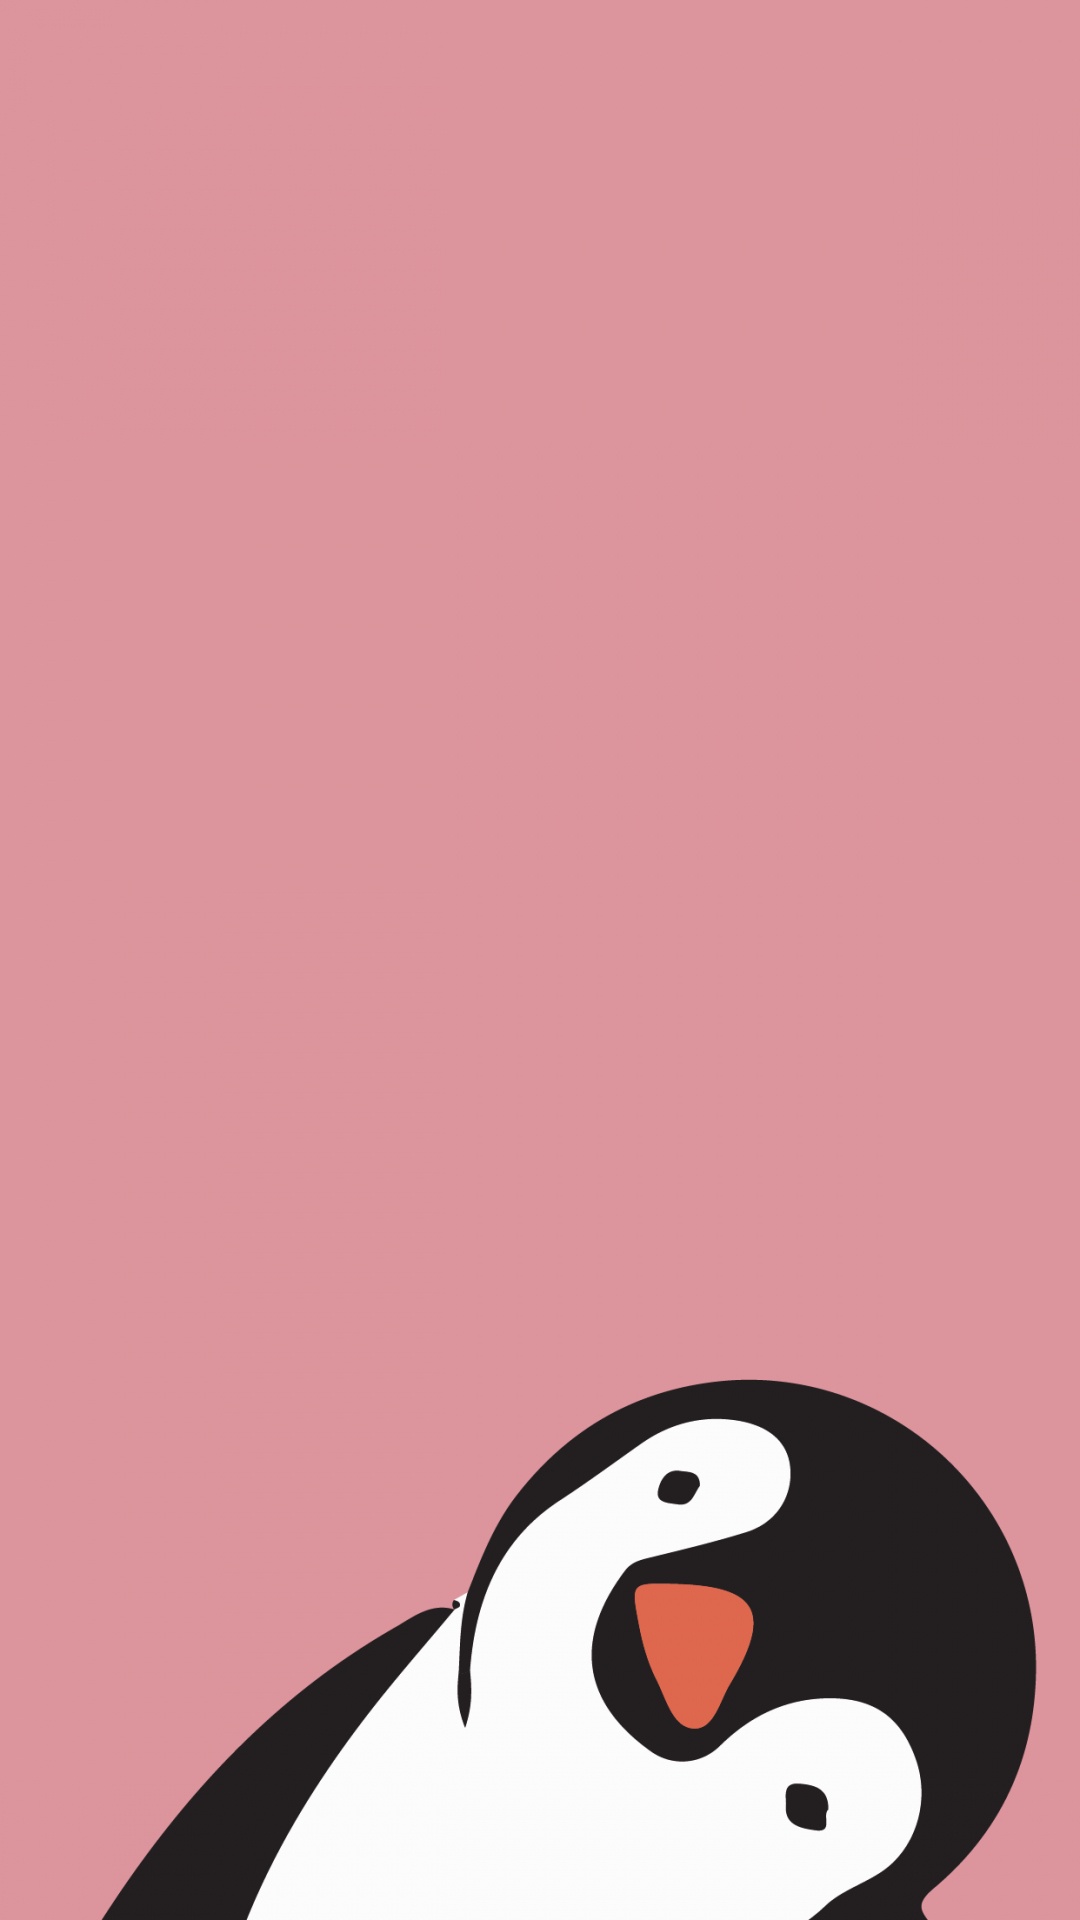 Penguin Cell Phone Wallpaper Images Free Download on Lovepik  400303060